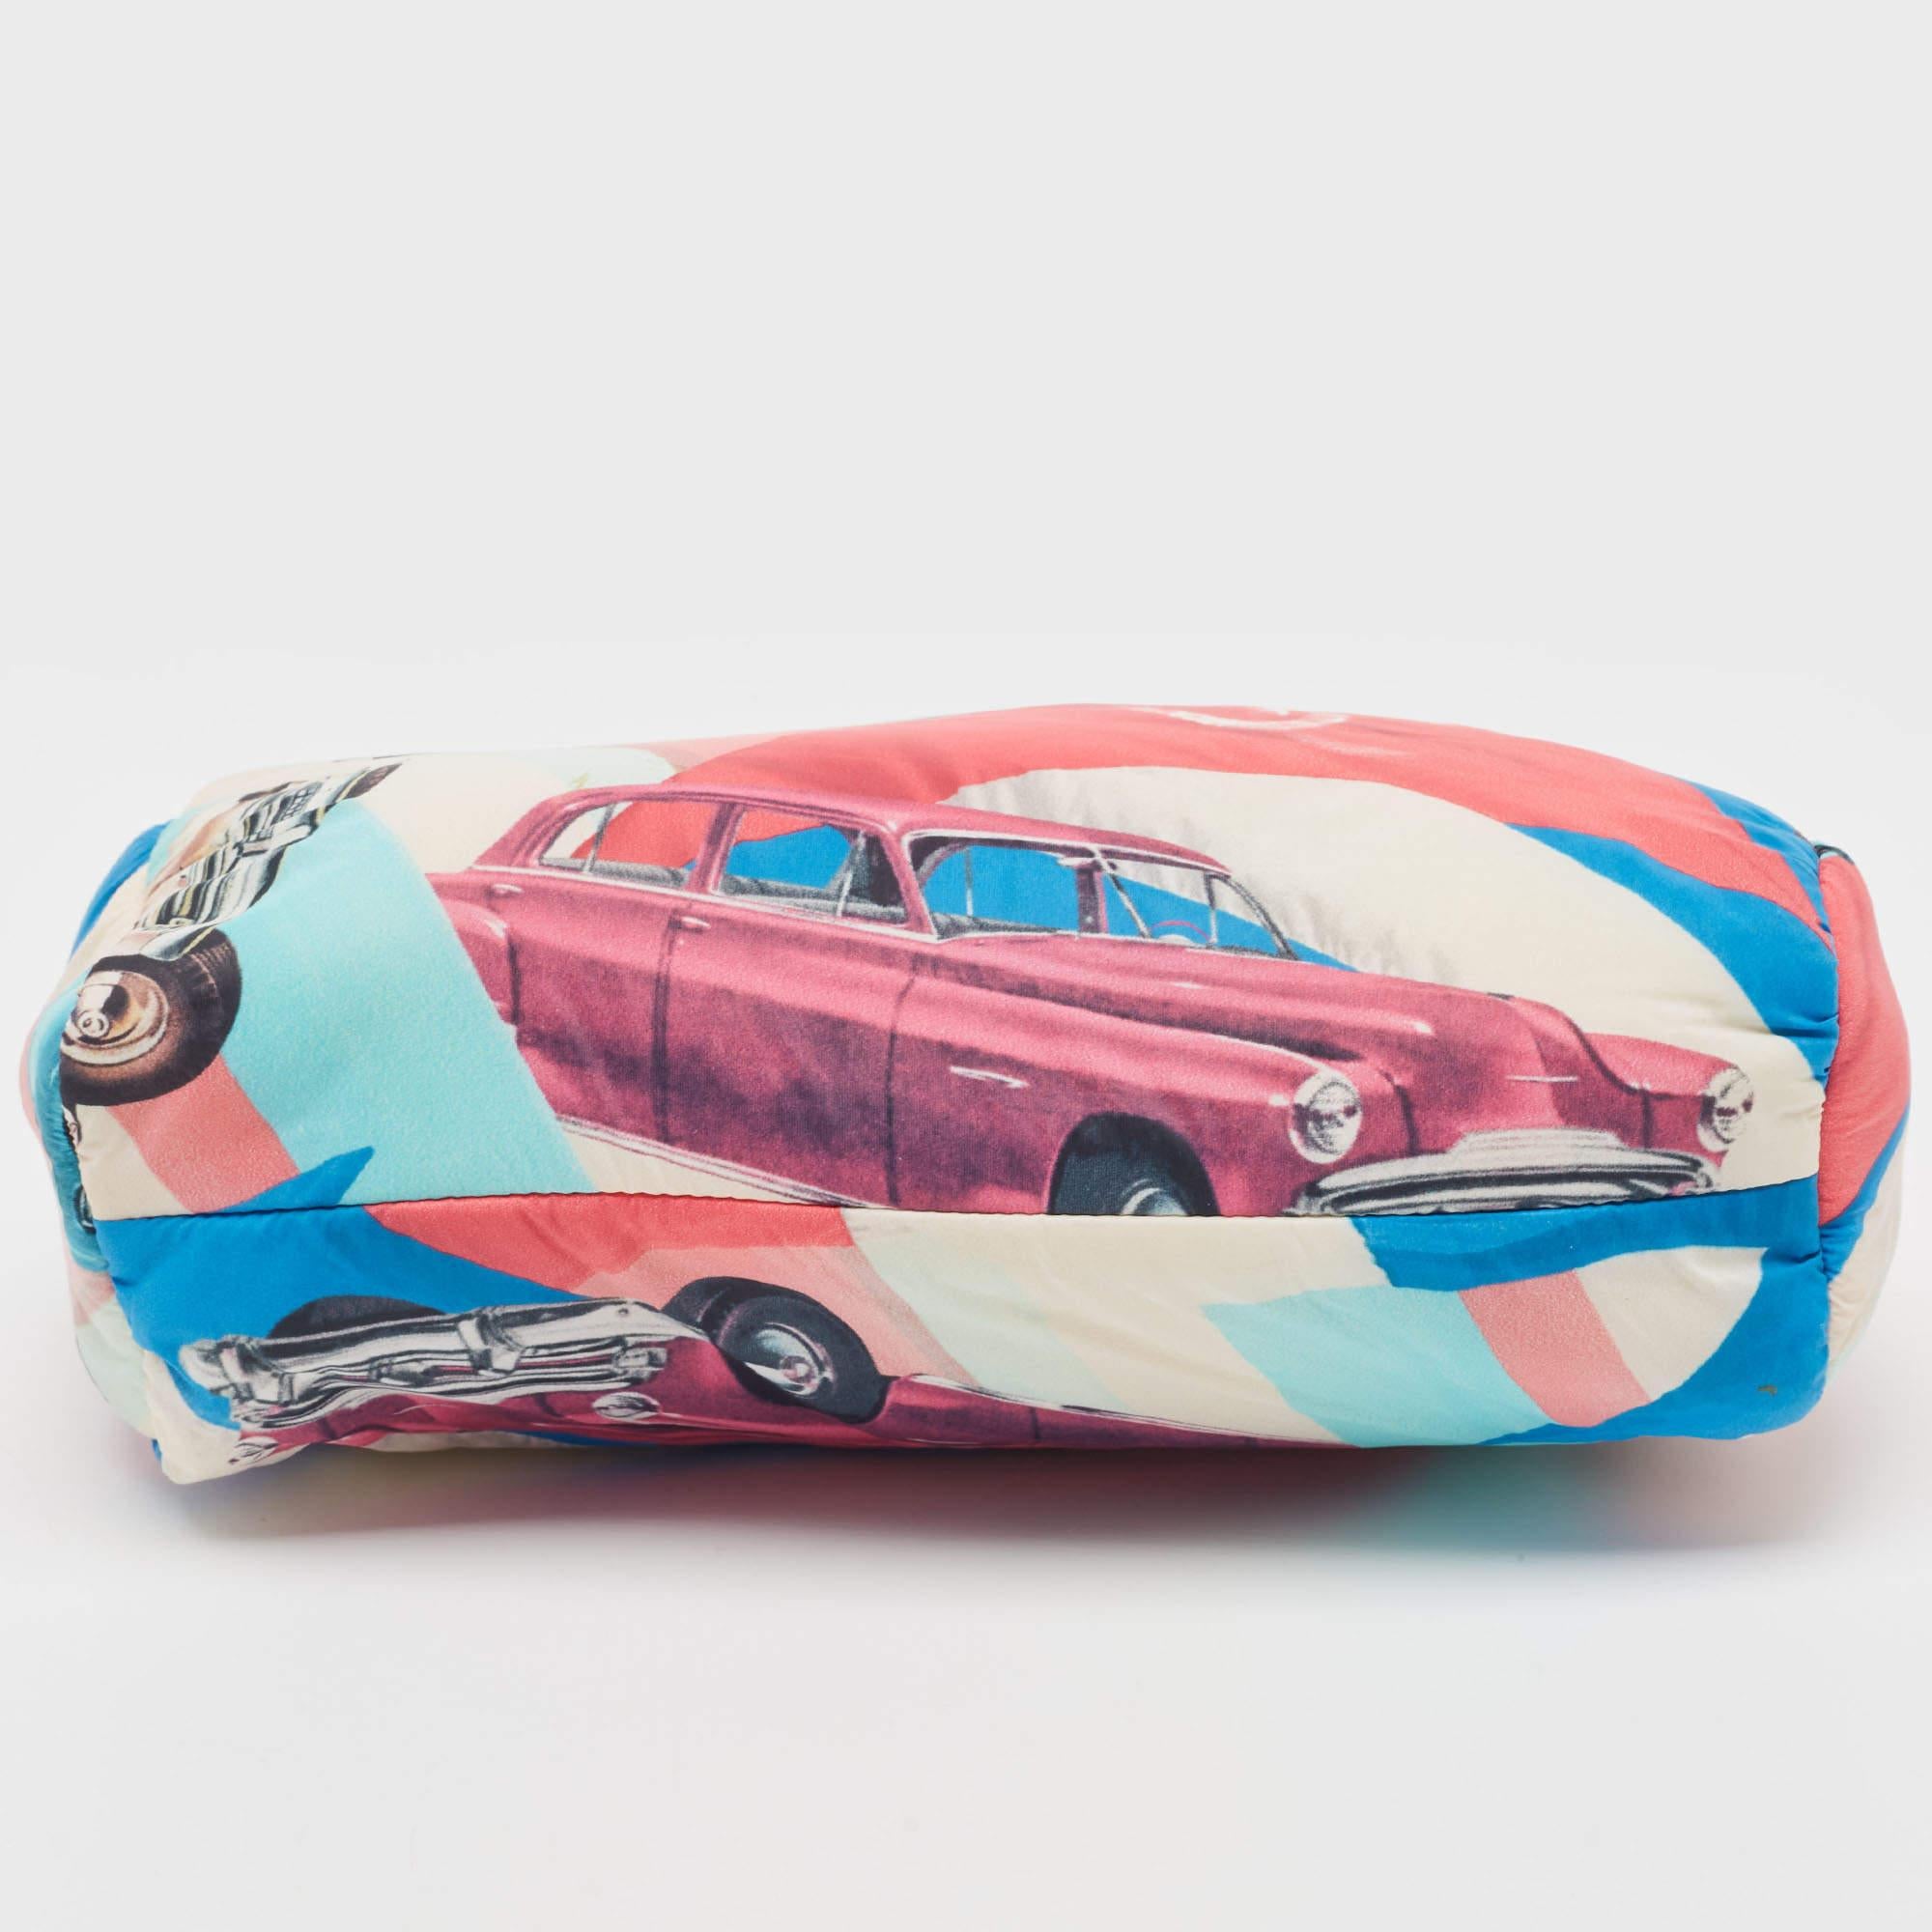 Keep your essentials effortlessly in this Chanel car print pouch. It features an elegant design and a roomy interior. This accessory will come in handy while traveling.

Includes: Authenticity Card, Brand Dustbag

